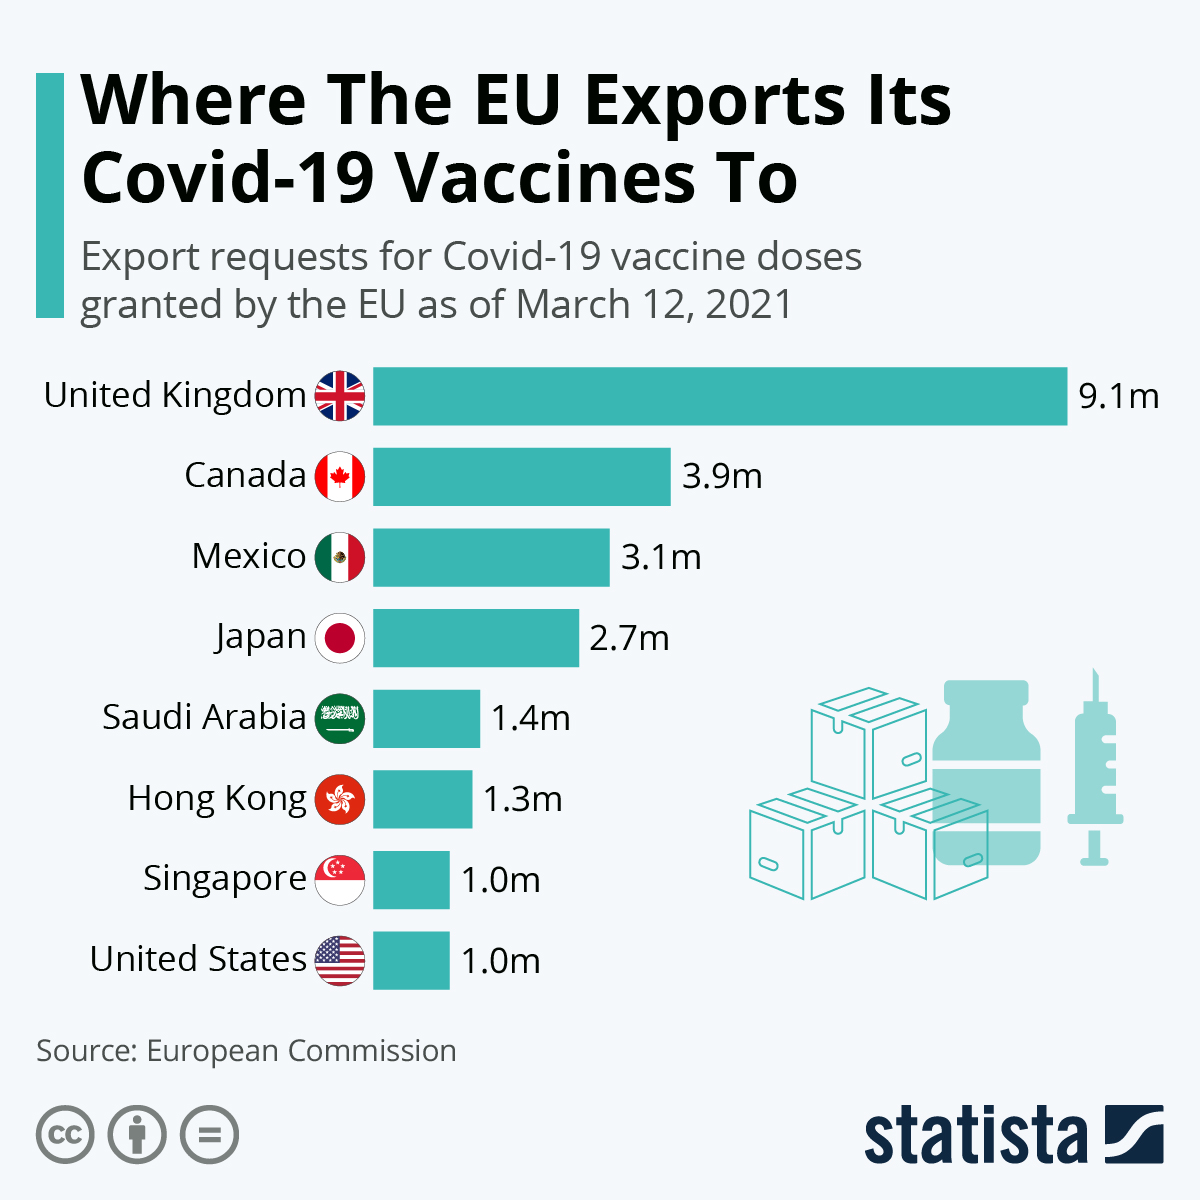 Where the EU Exports Its Covid-19 Vaccines To